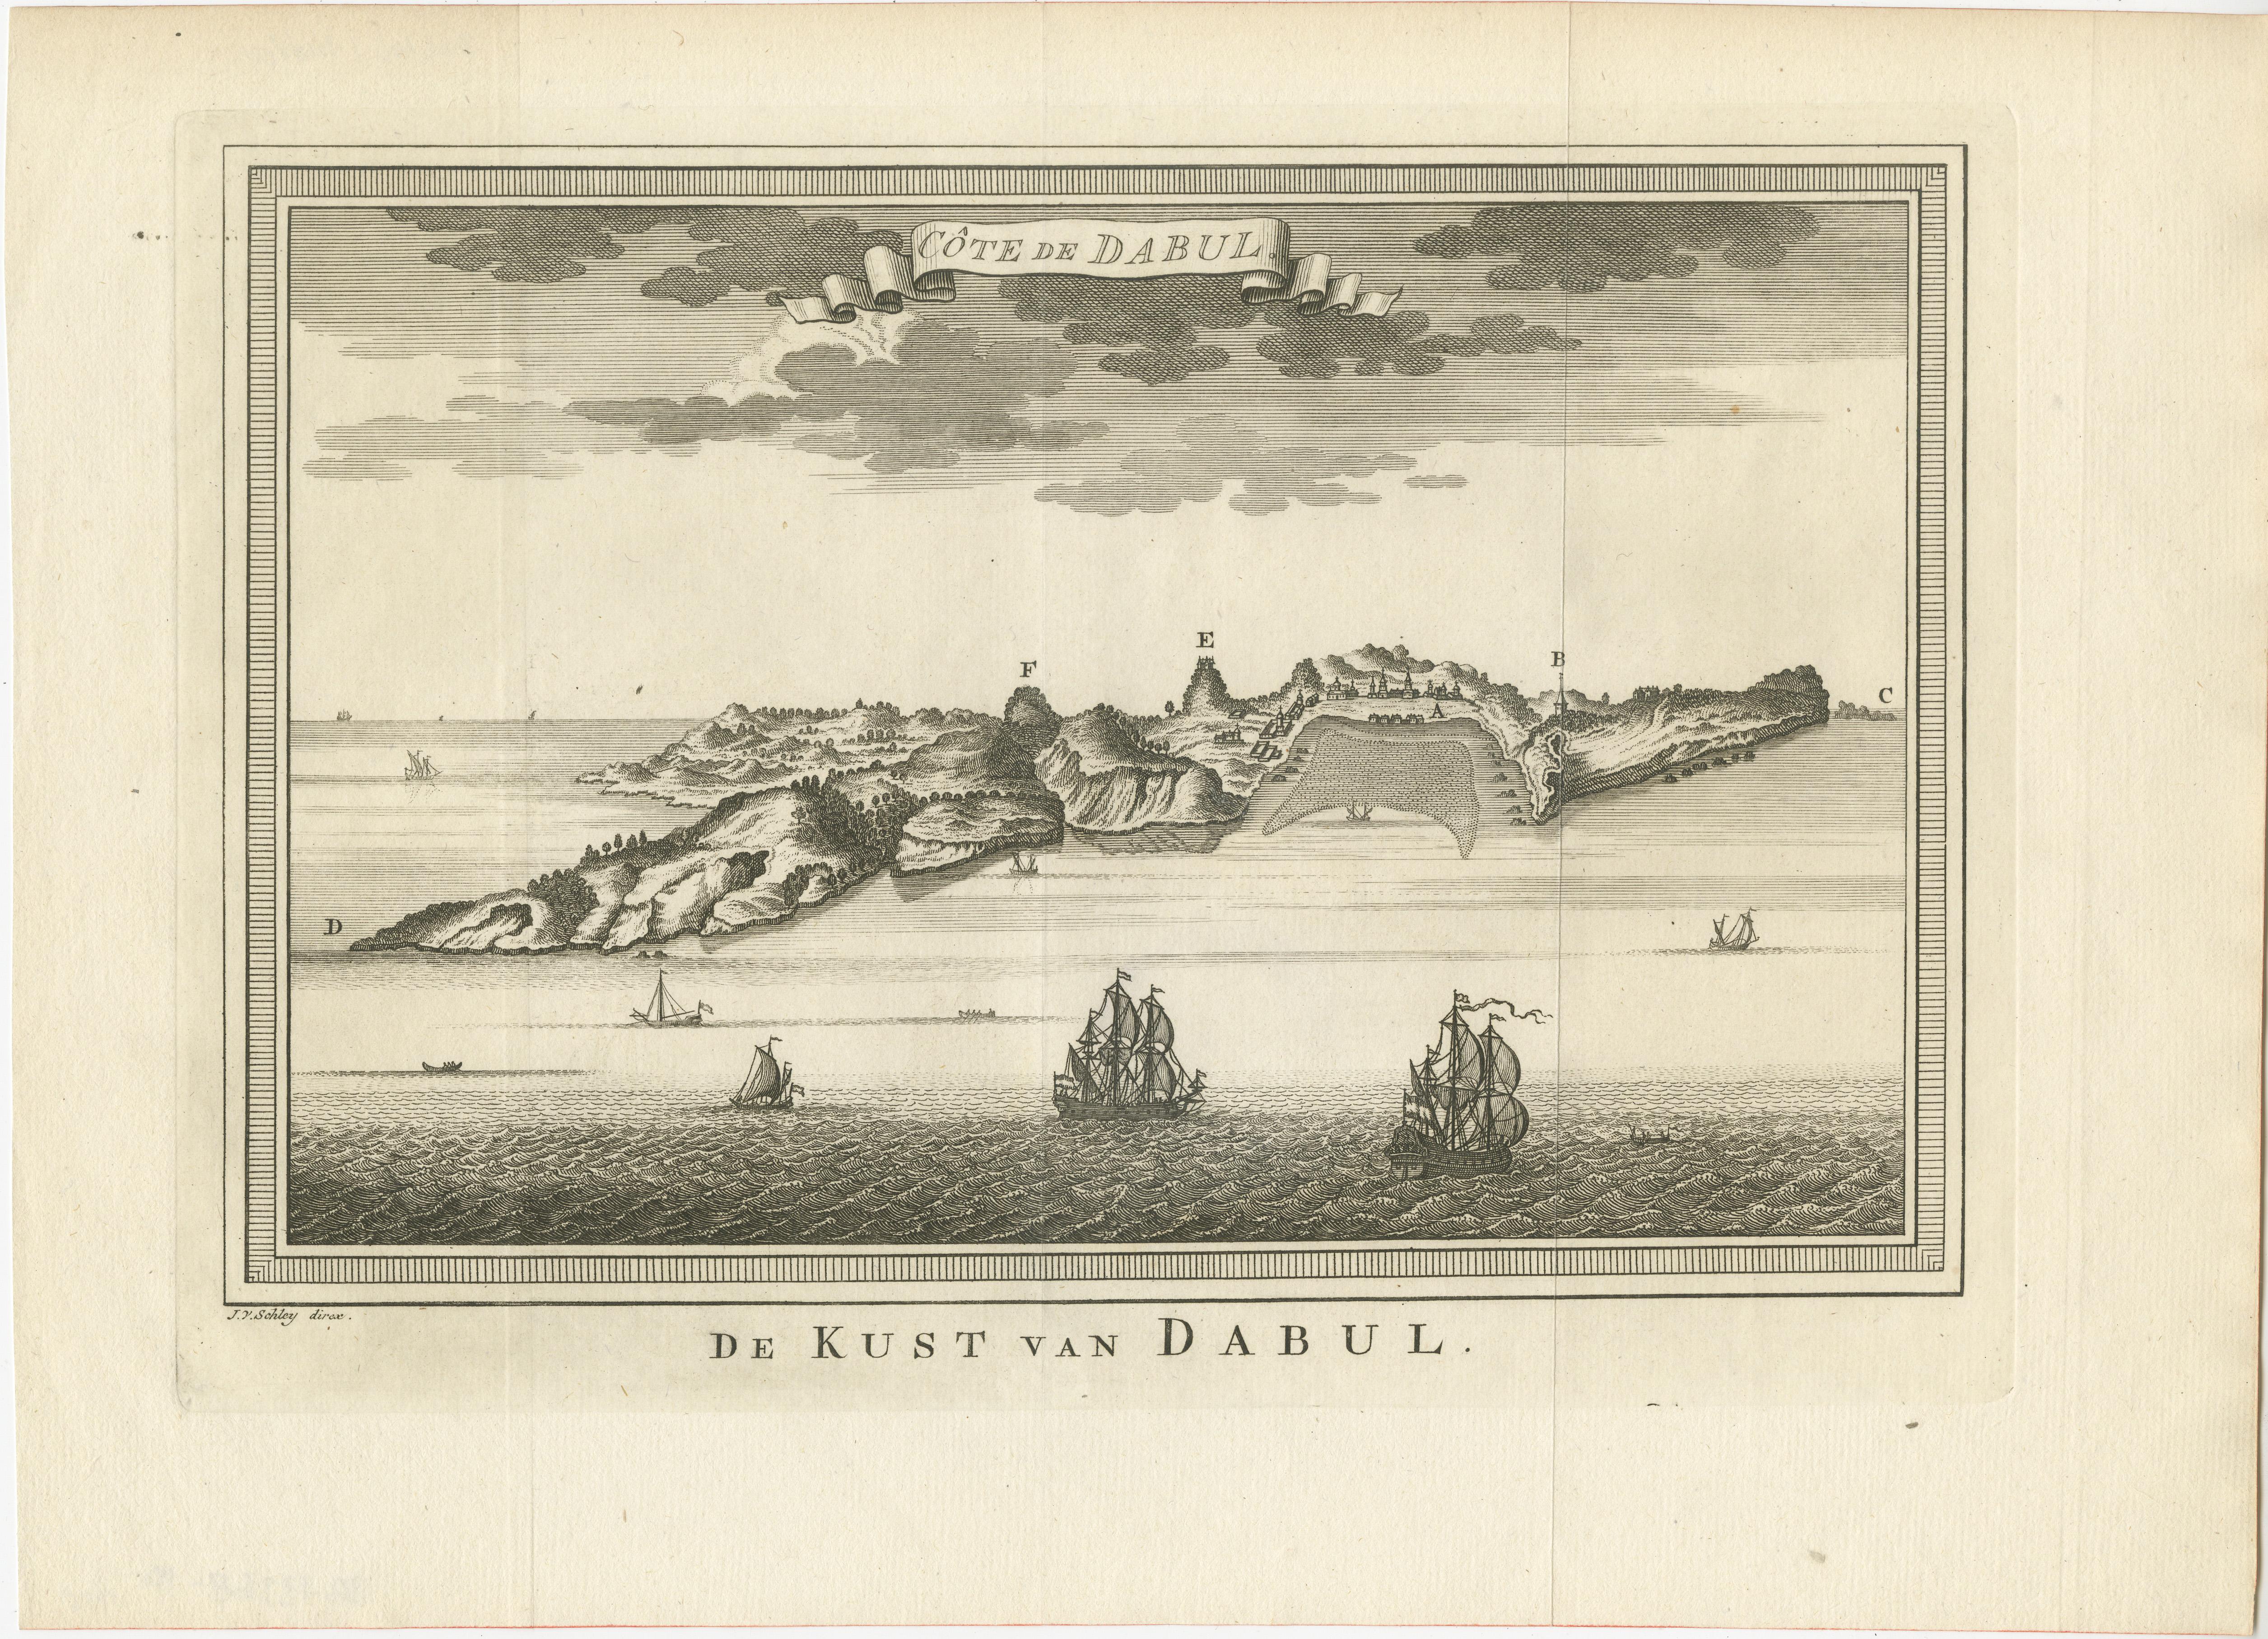 Antique print titled 'Côte de Dabul - De Kust van Dabul'. Original old print of the coast of port city Dabhol in India. In the 15th and 16th centuries, Dabul was an opulent Muslim trade center. Around 1660 it was annexed to the new Maratha kingdom.